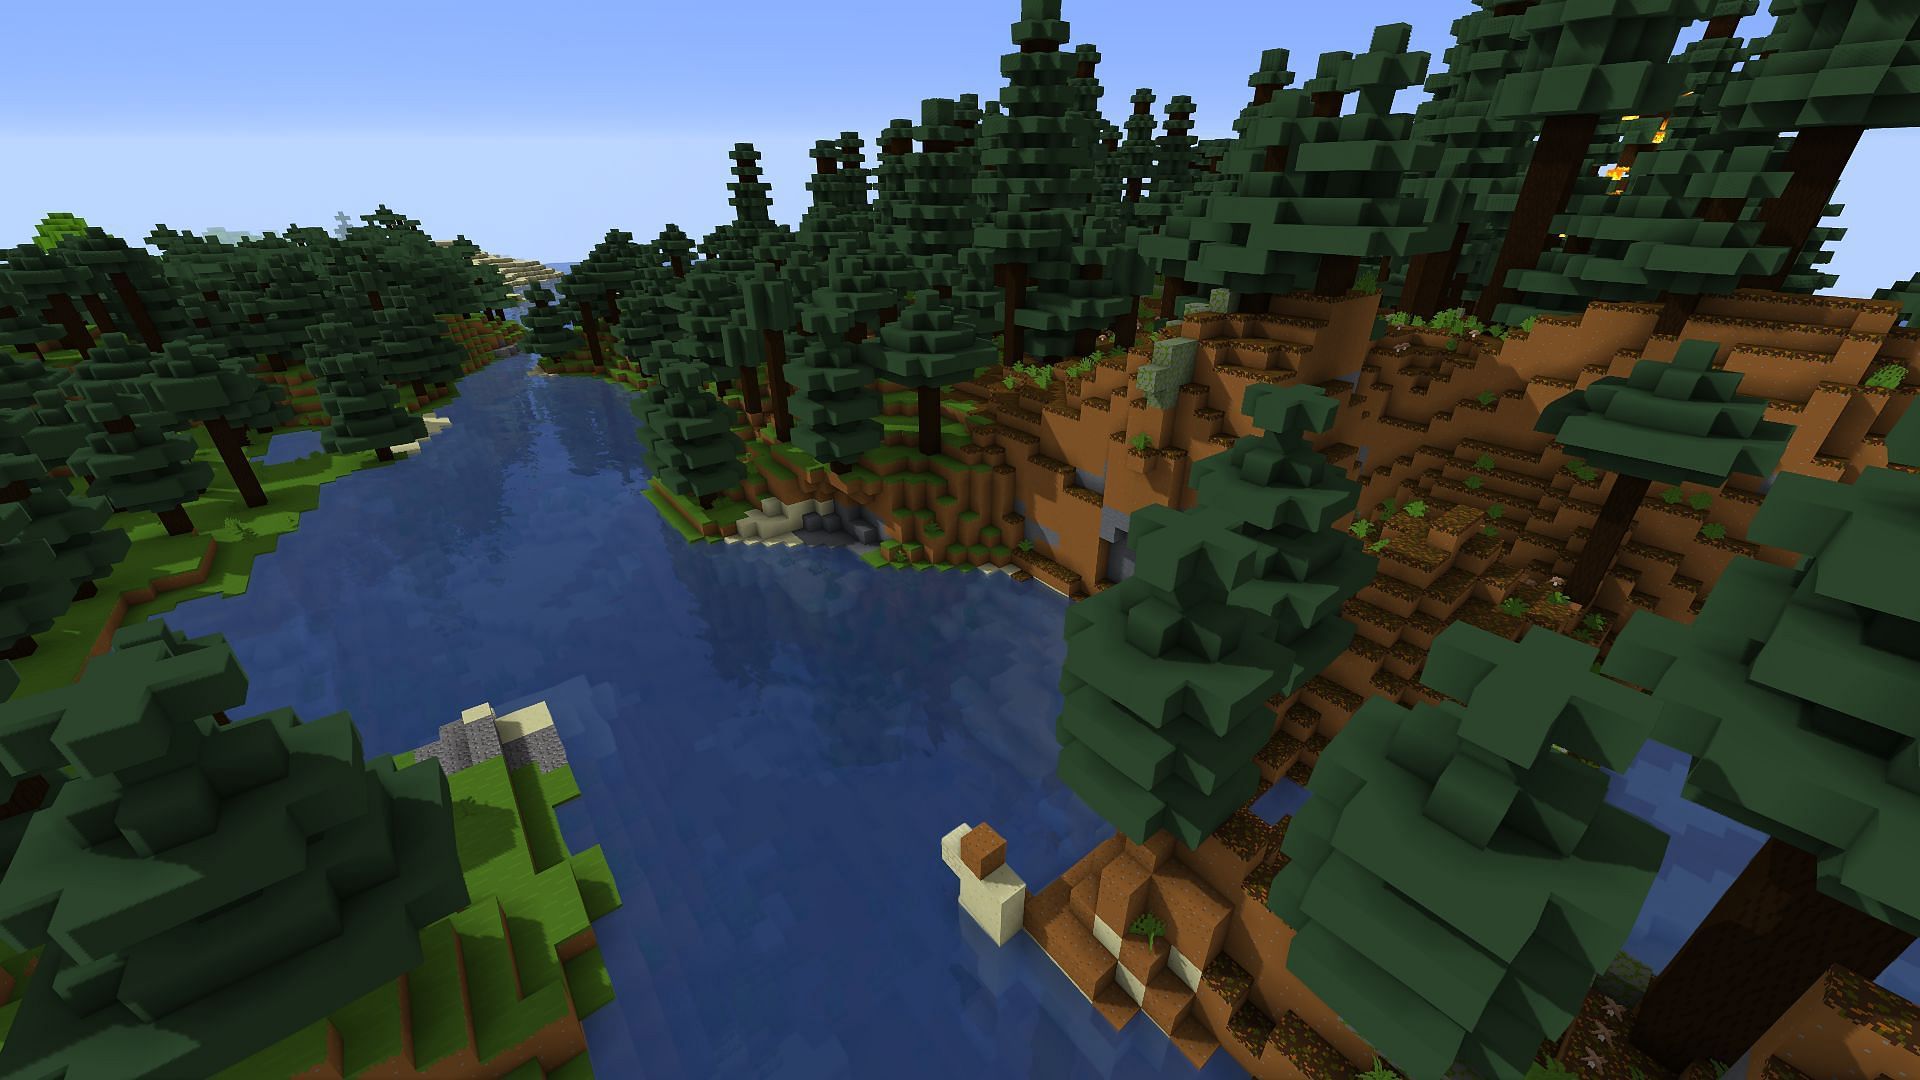 What the world looks like when using the Barebones resource pack (Image via Minecraft)